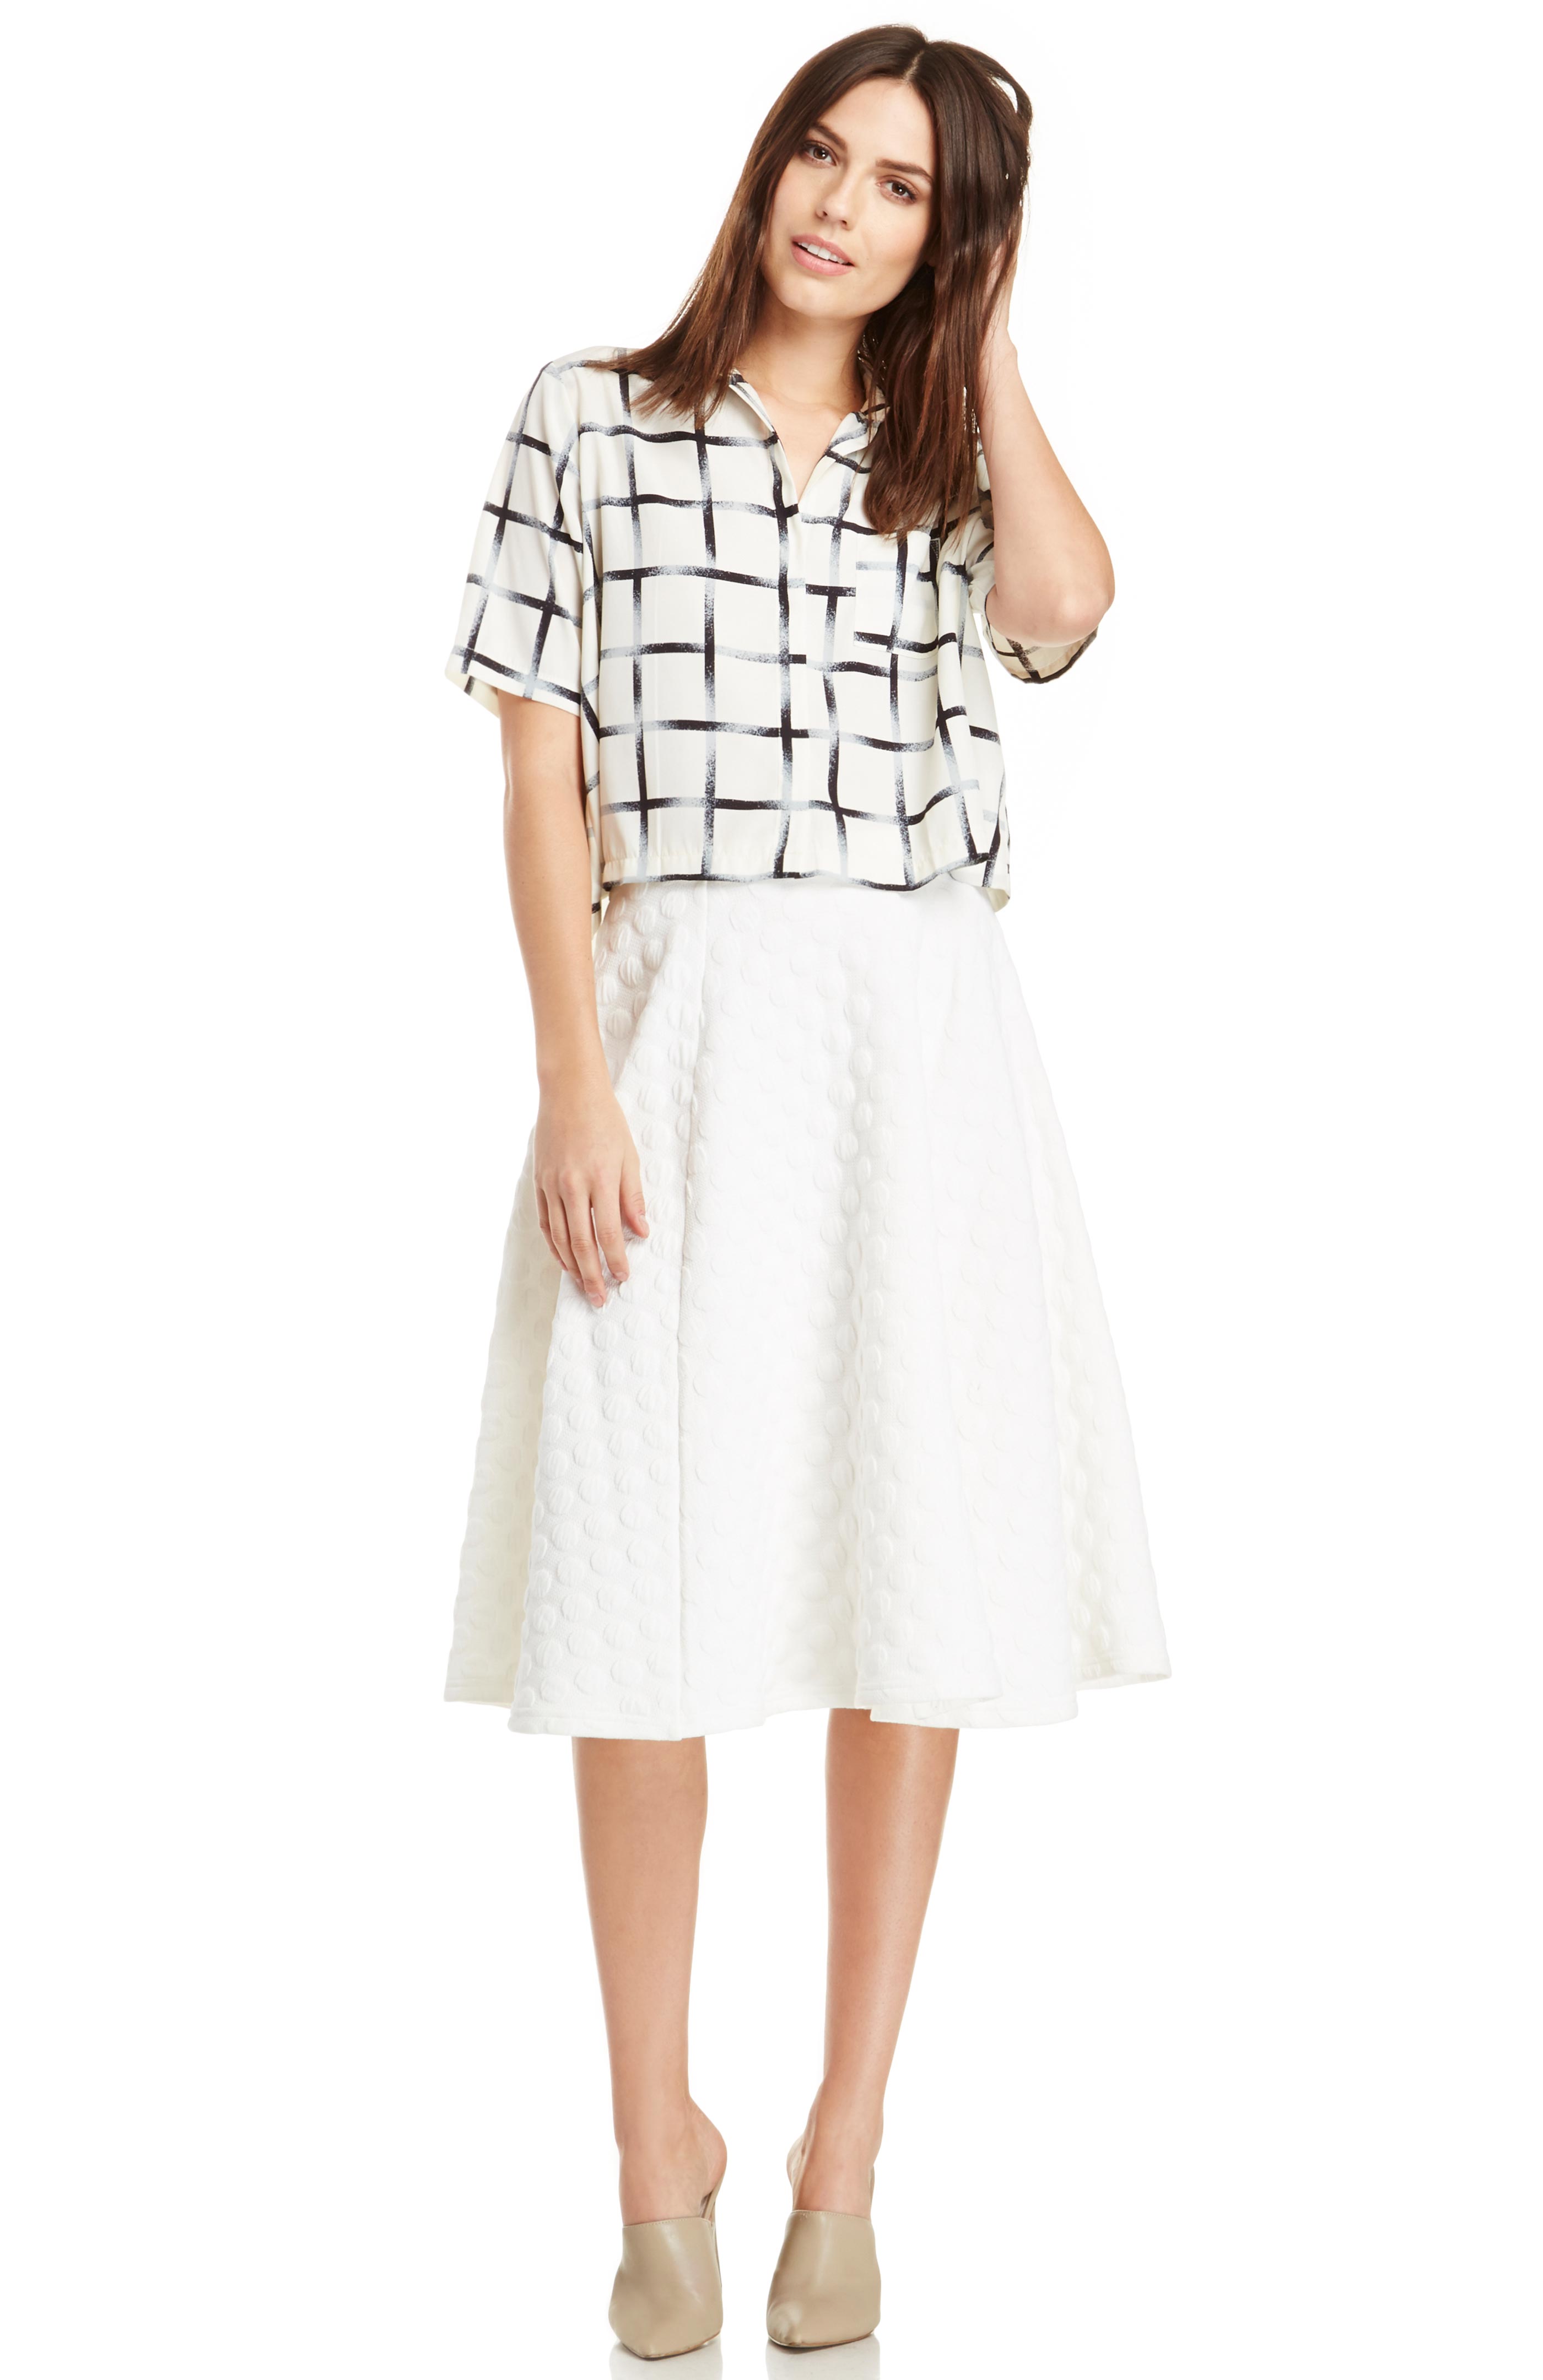 J.O.A. Dotted Jacquard Skirt in Ivory | DAILYLOOK